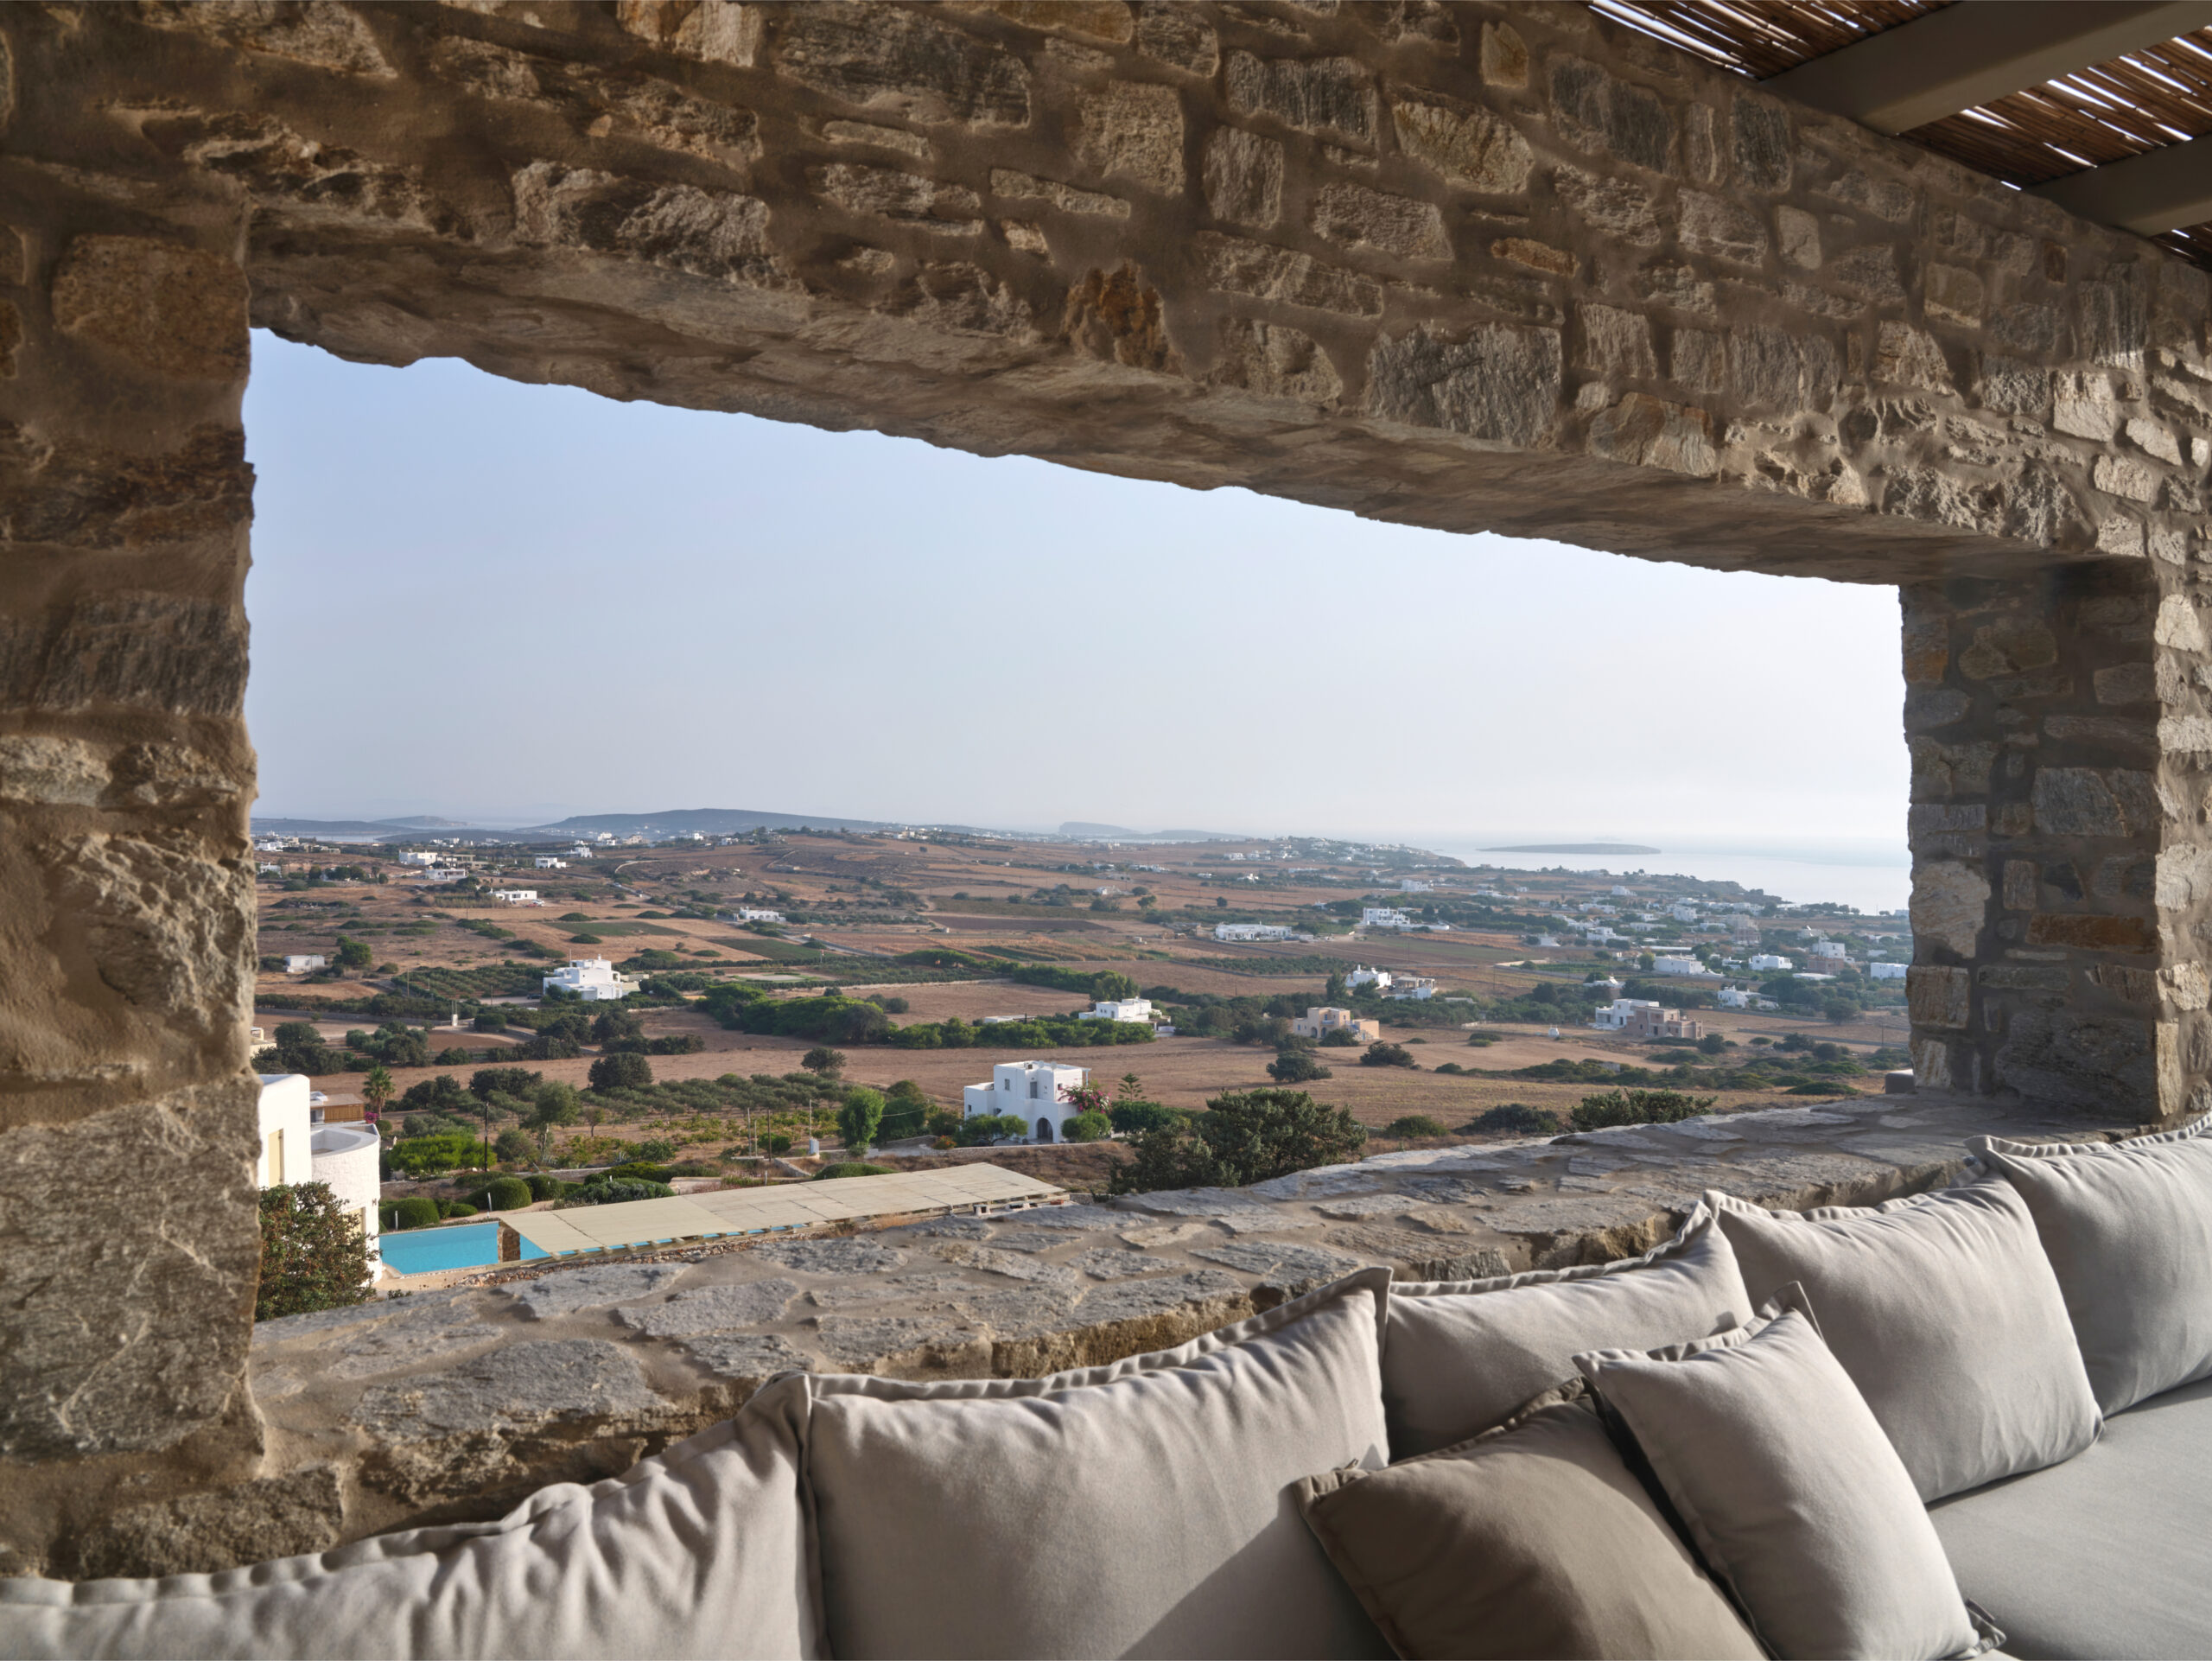 Spectacular views to the village from under the pergola.